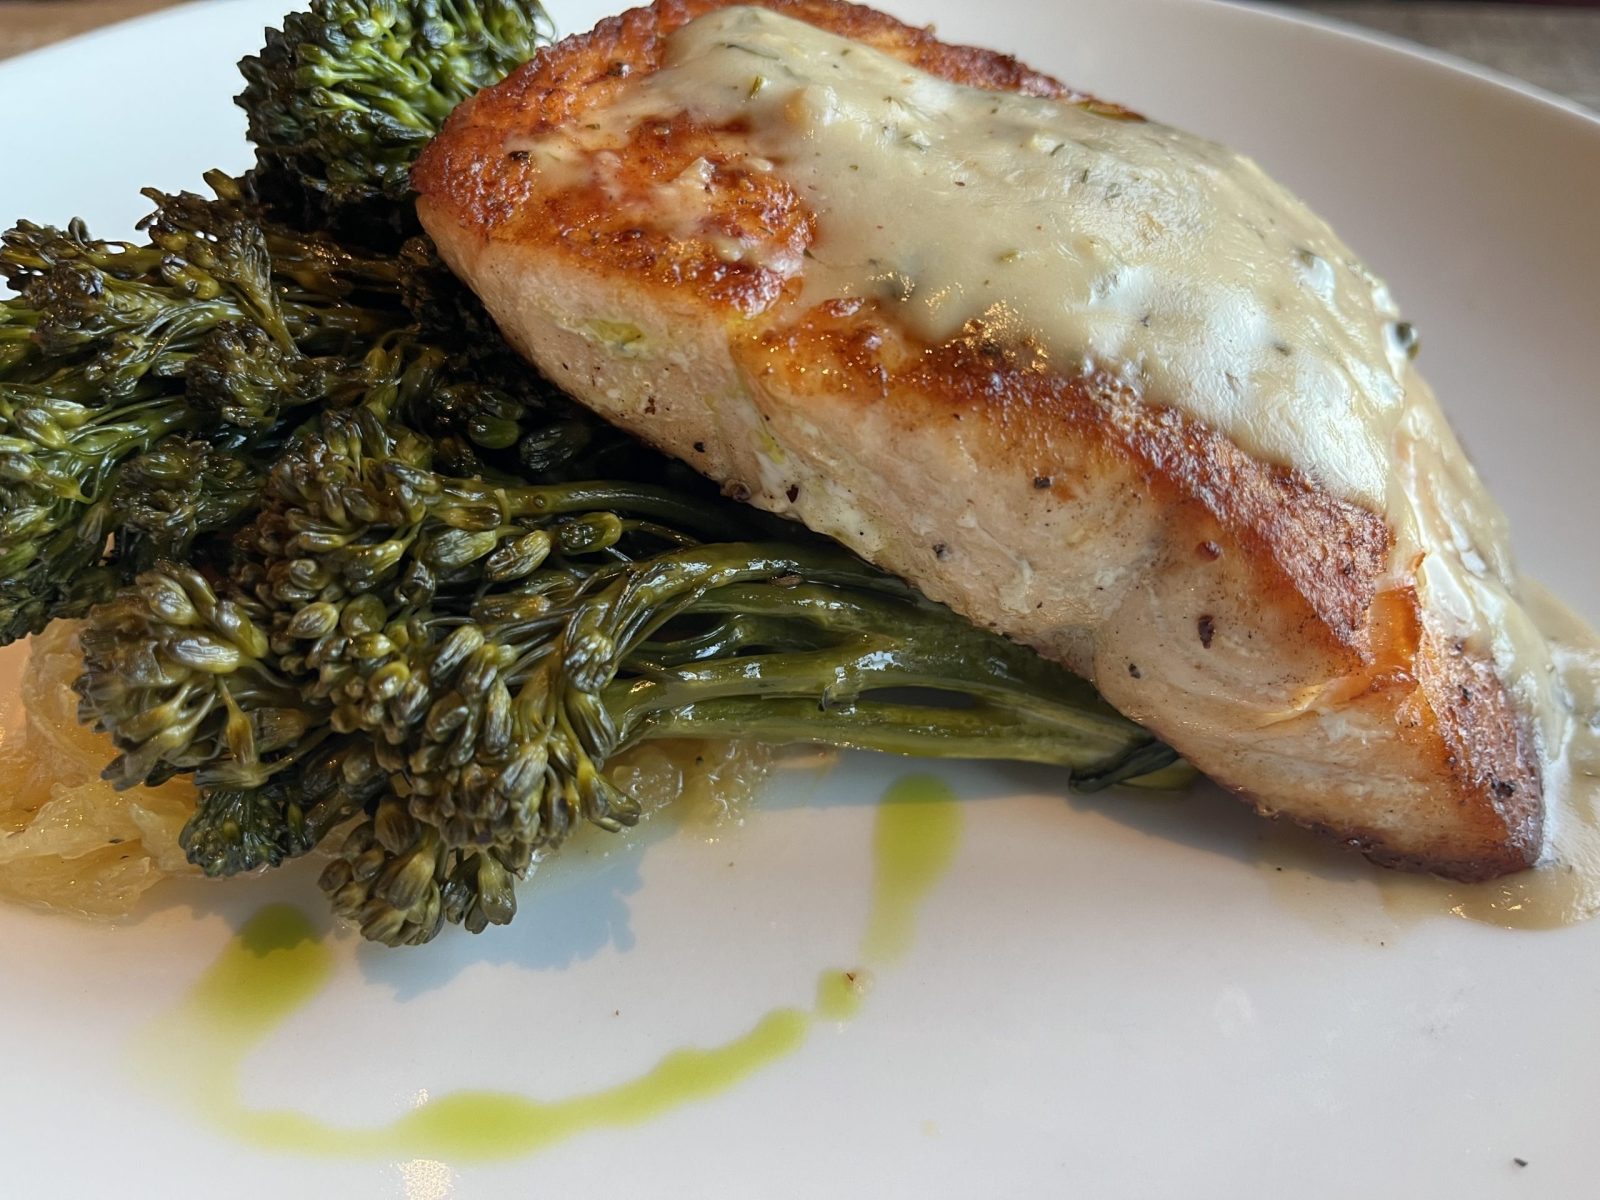 The roasted salmon with spaghetti squash, broccolini, lemon and caper sauce at Ozark Mill at Finley Farms